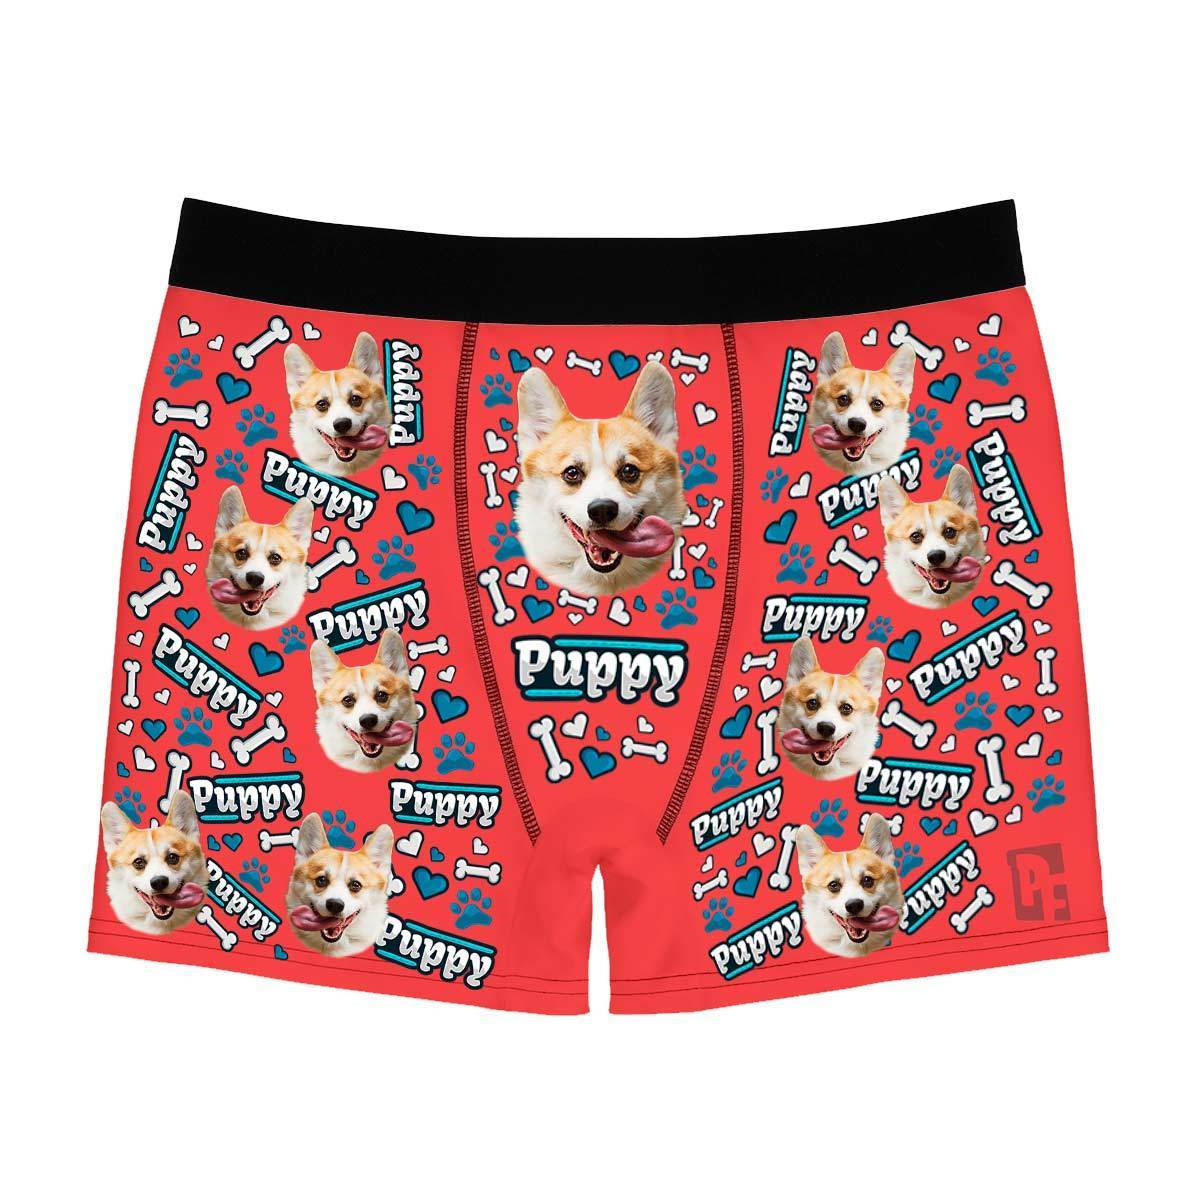 Red Puppy men's boxer briefs personalized with photo printed on them